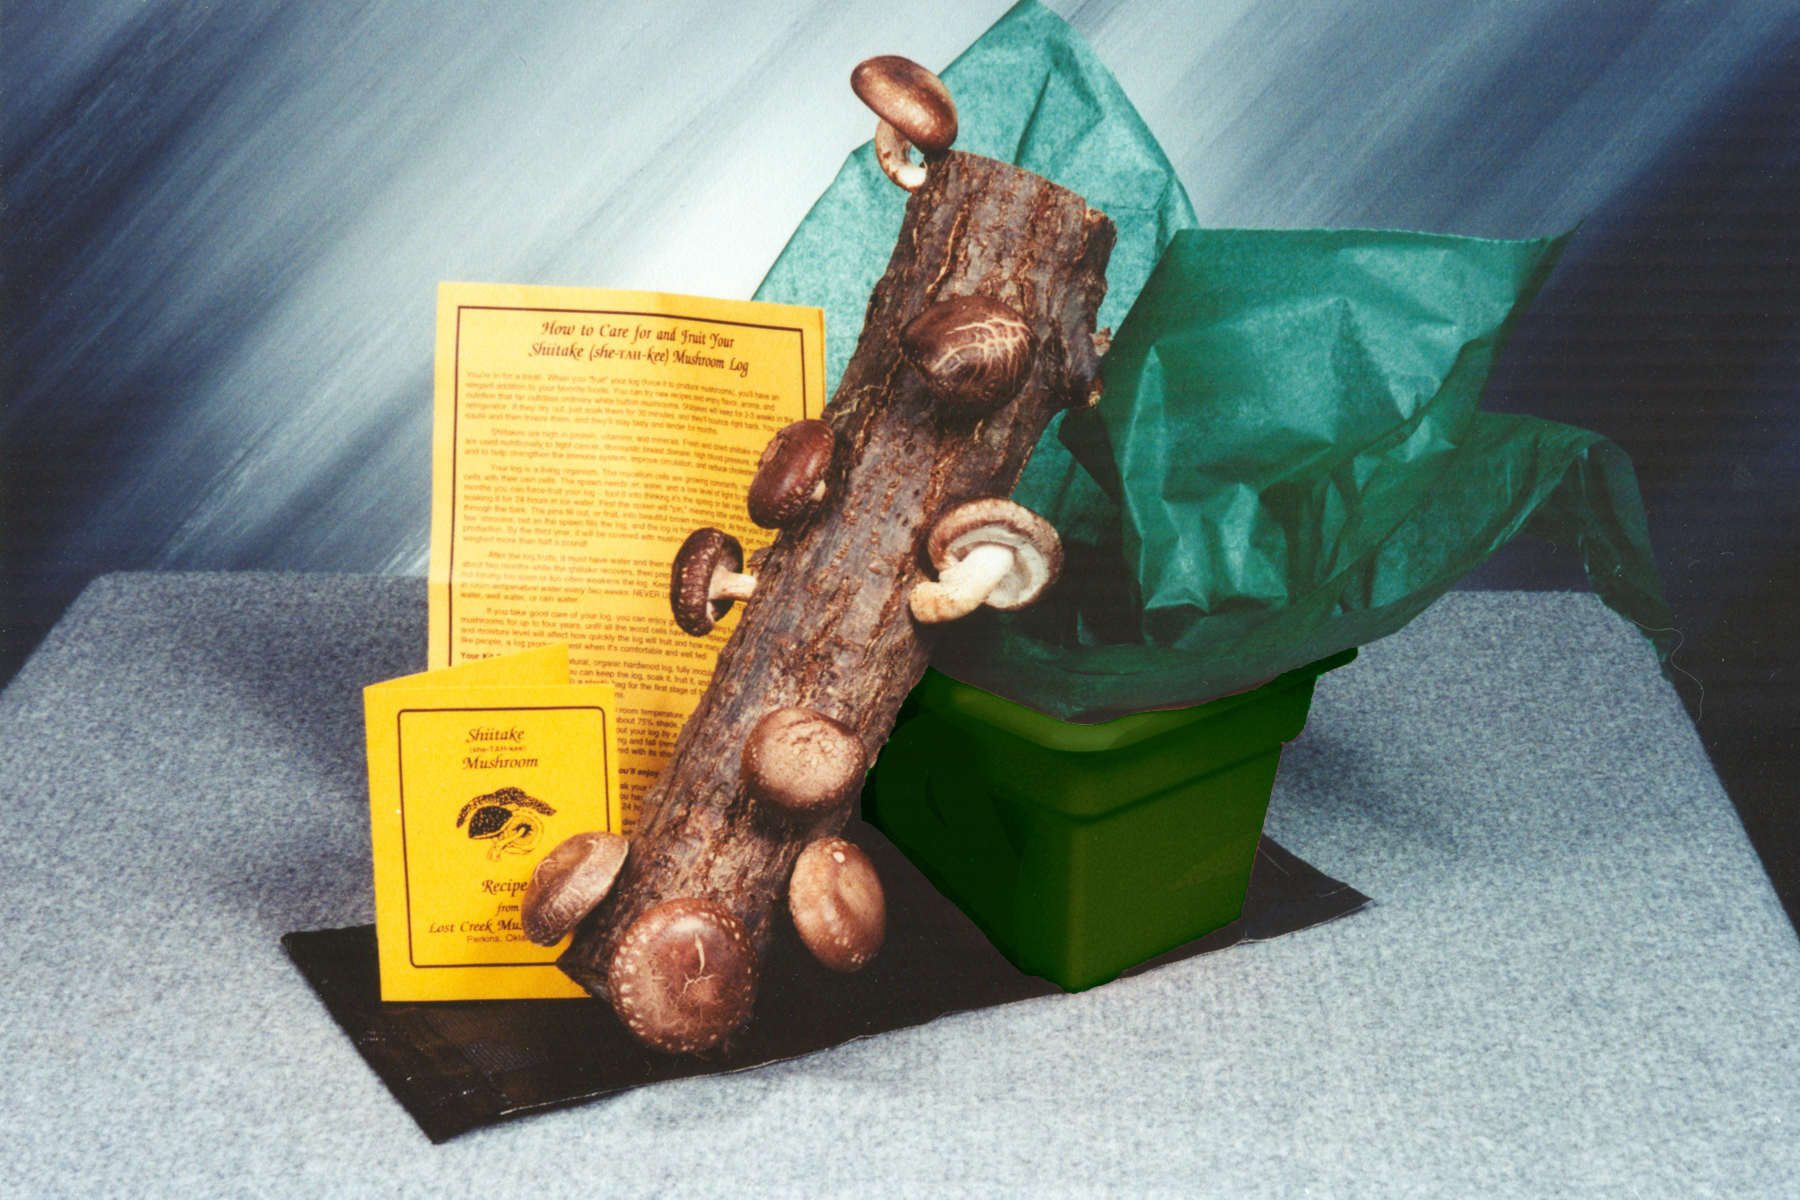 Shiitake Mushroom Log Kit with its own Tray for Soaking, Fruiting and Resting the Log